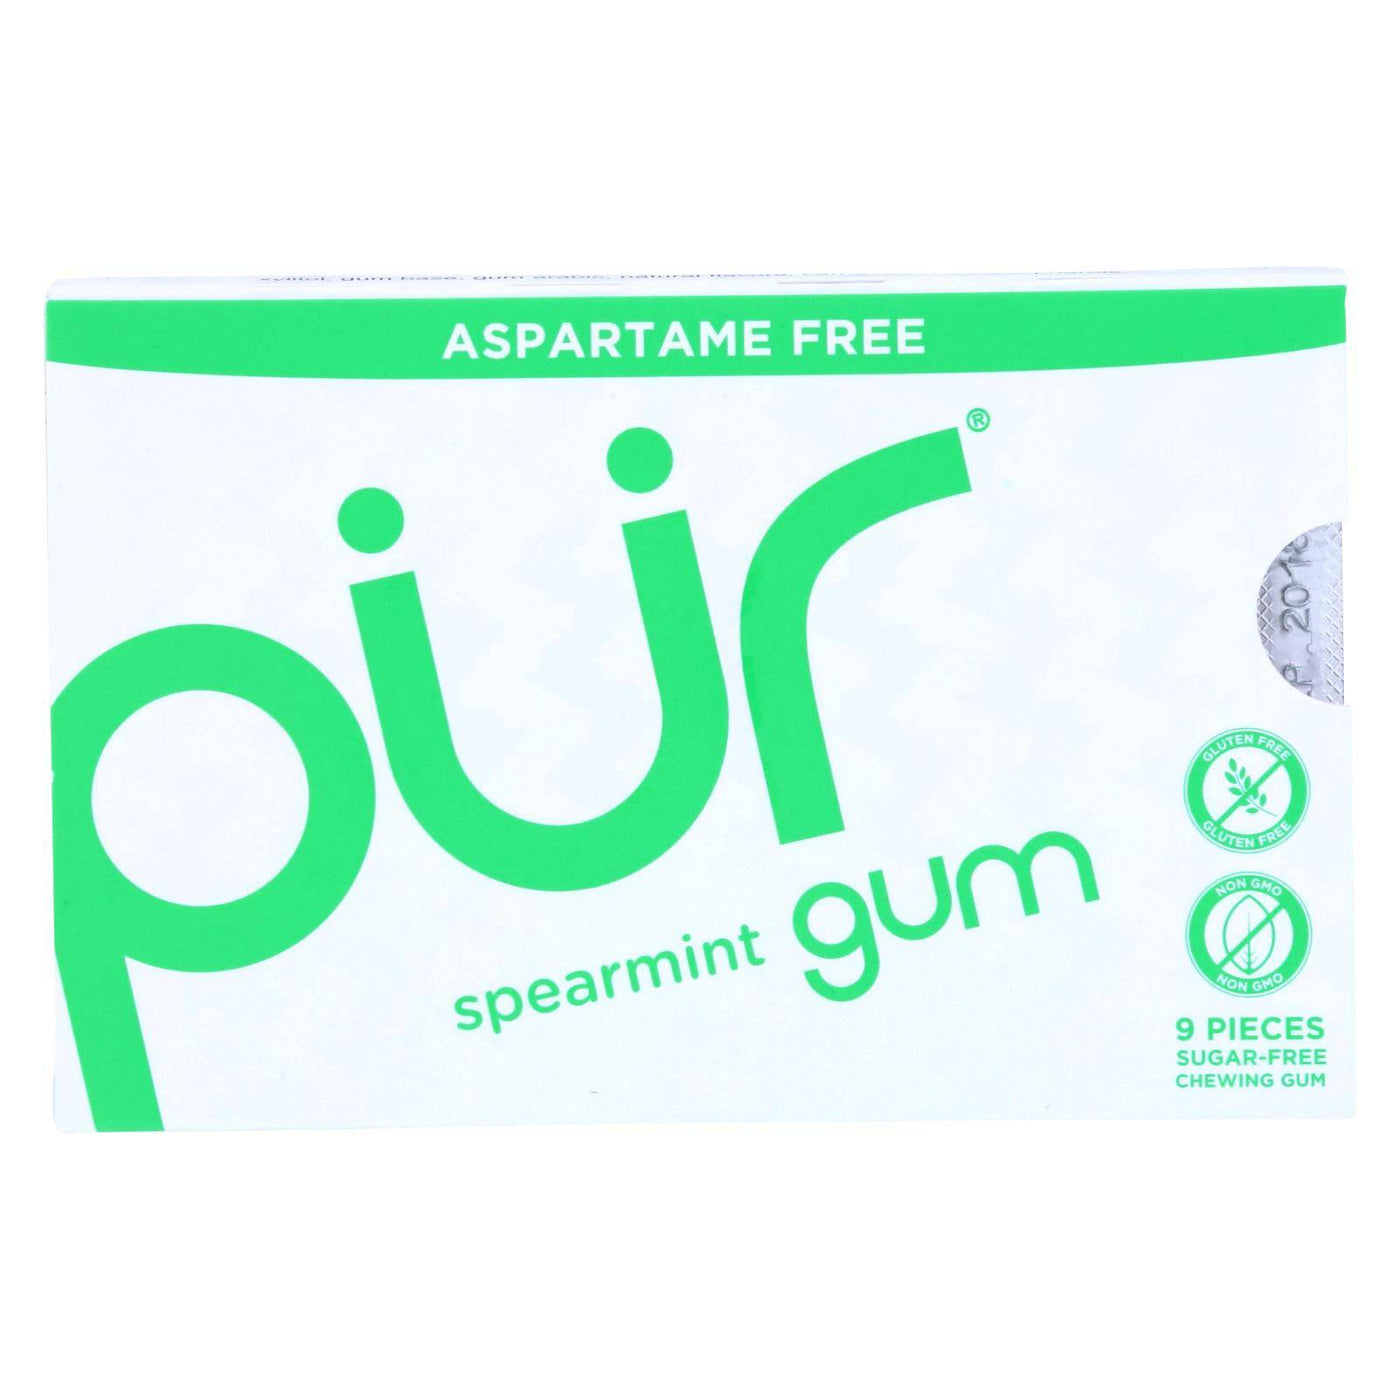 Buy Pur Gum - Spearmint - Aspartame Free - 9 Pieces - 12.6 G - Case Of 12  at OnlyNaturals.us